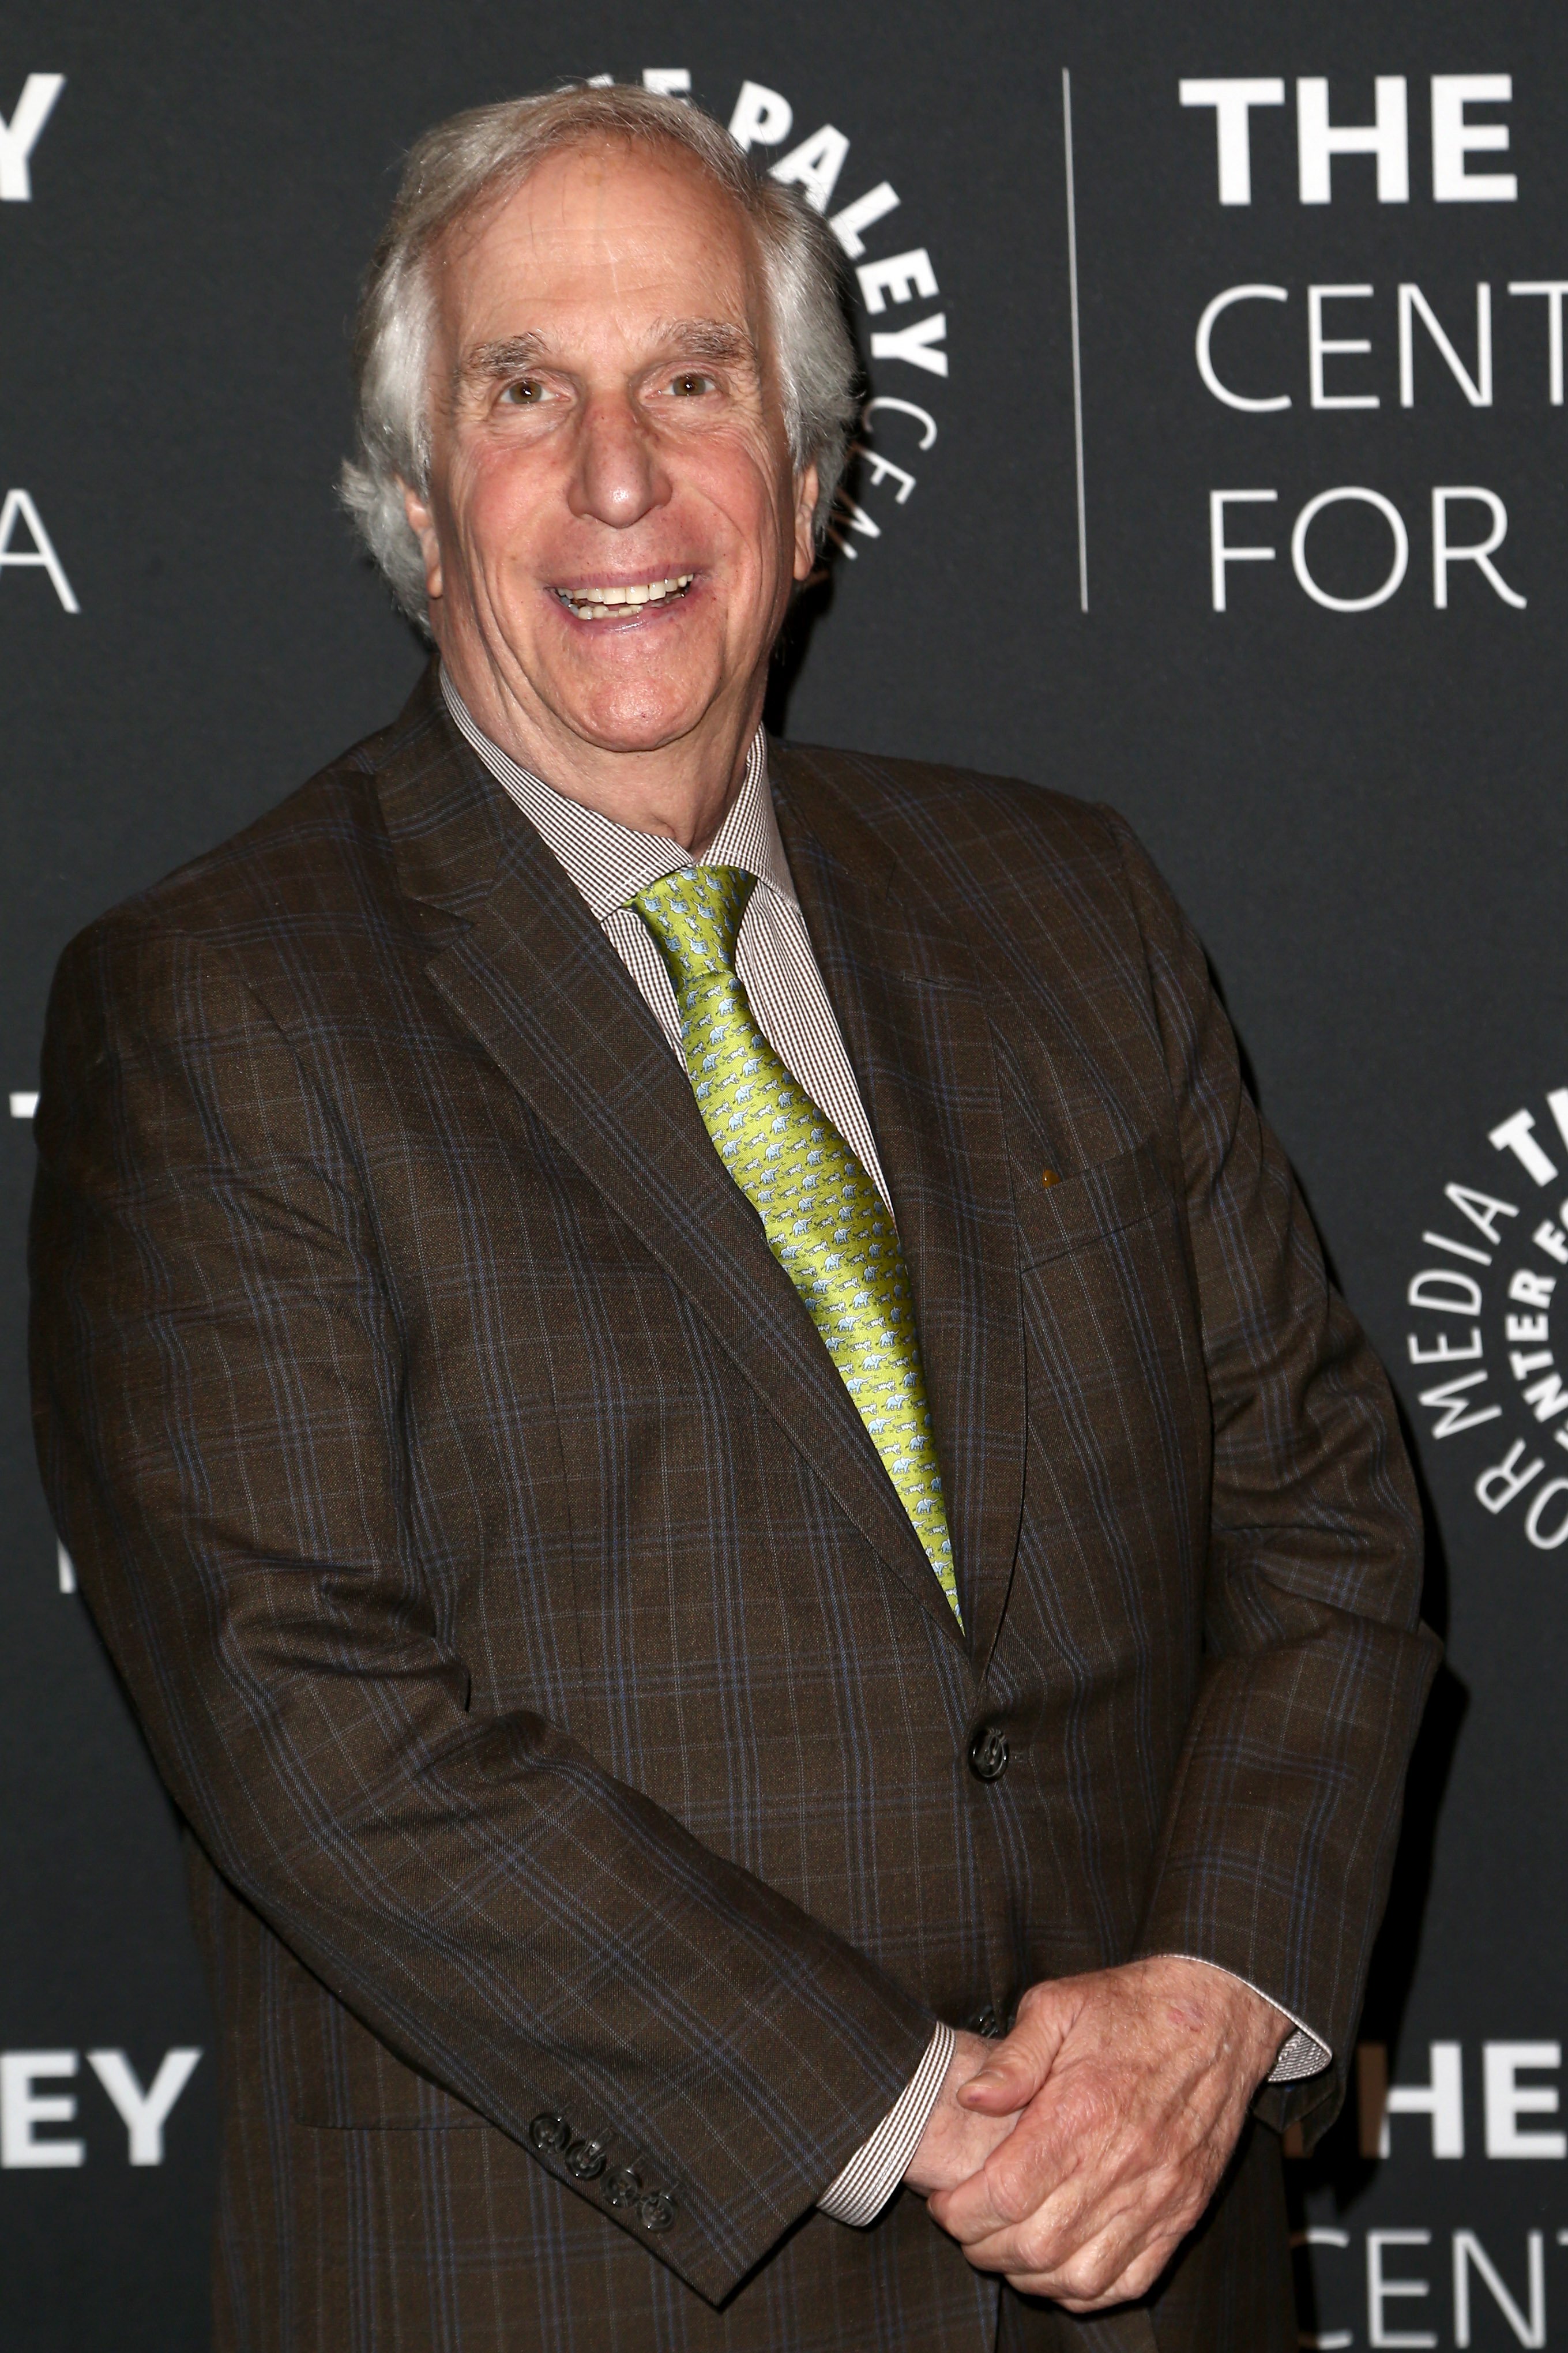 Henry Winkler attends The Paley Center for Media Presents An Evening With Henry Winkler at the Beverly Wilshire Four Seasons Hotel on February 12, 2020. | Source: Getty Images